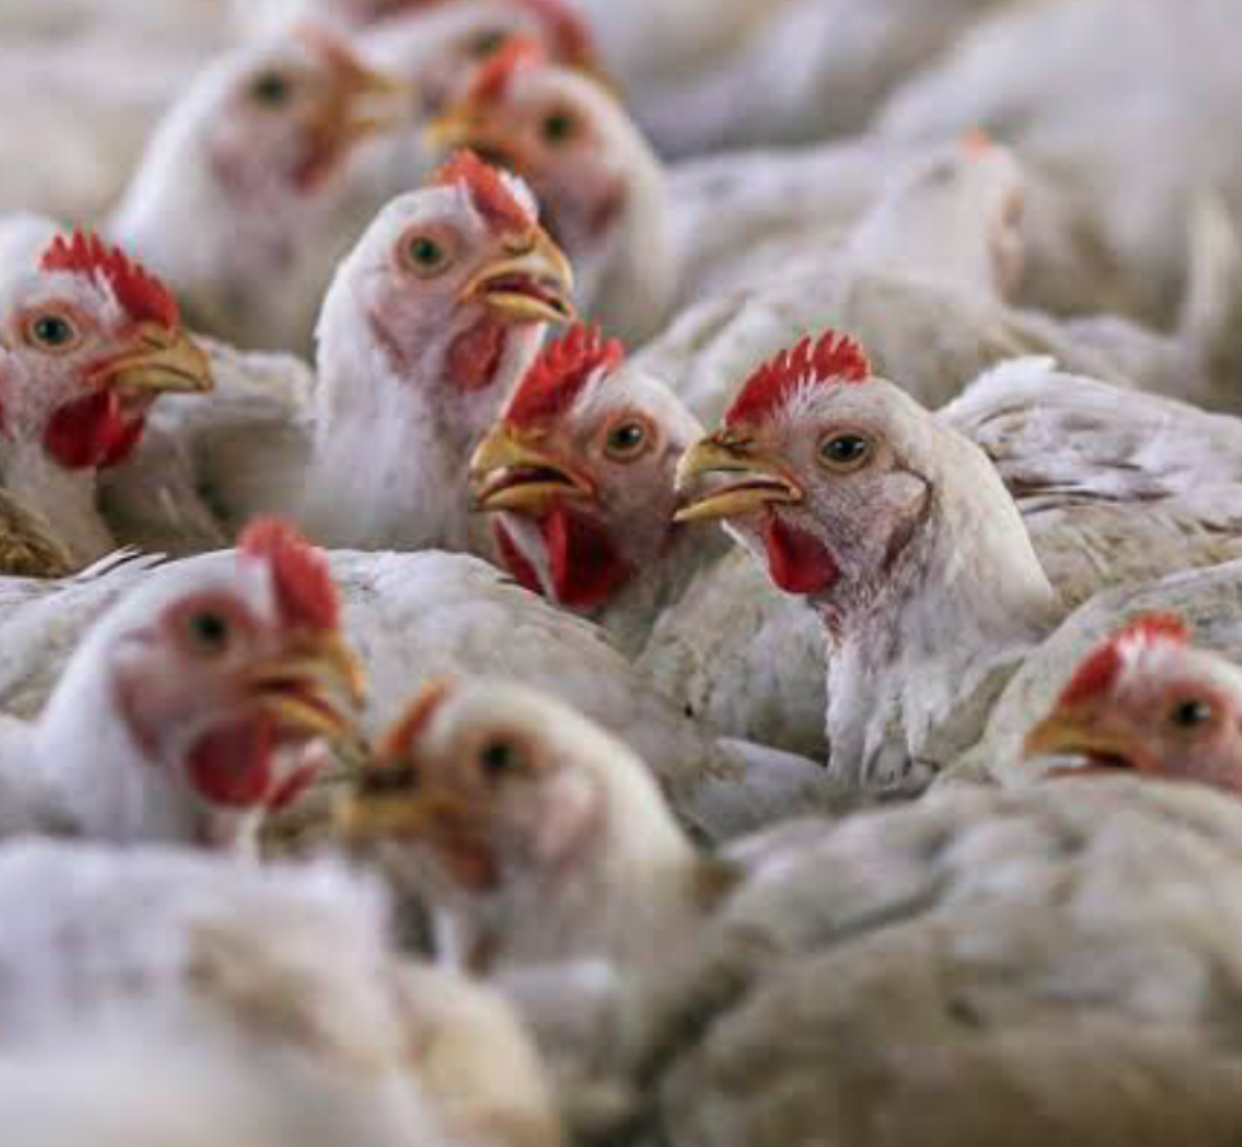 Consumers Association urges government to ban South African poultry products amid bird flue outbreak 